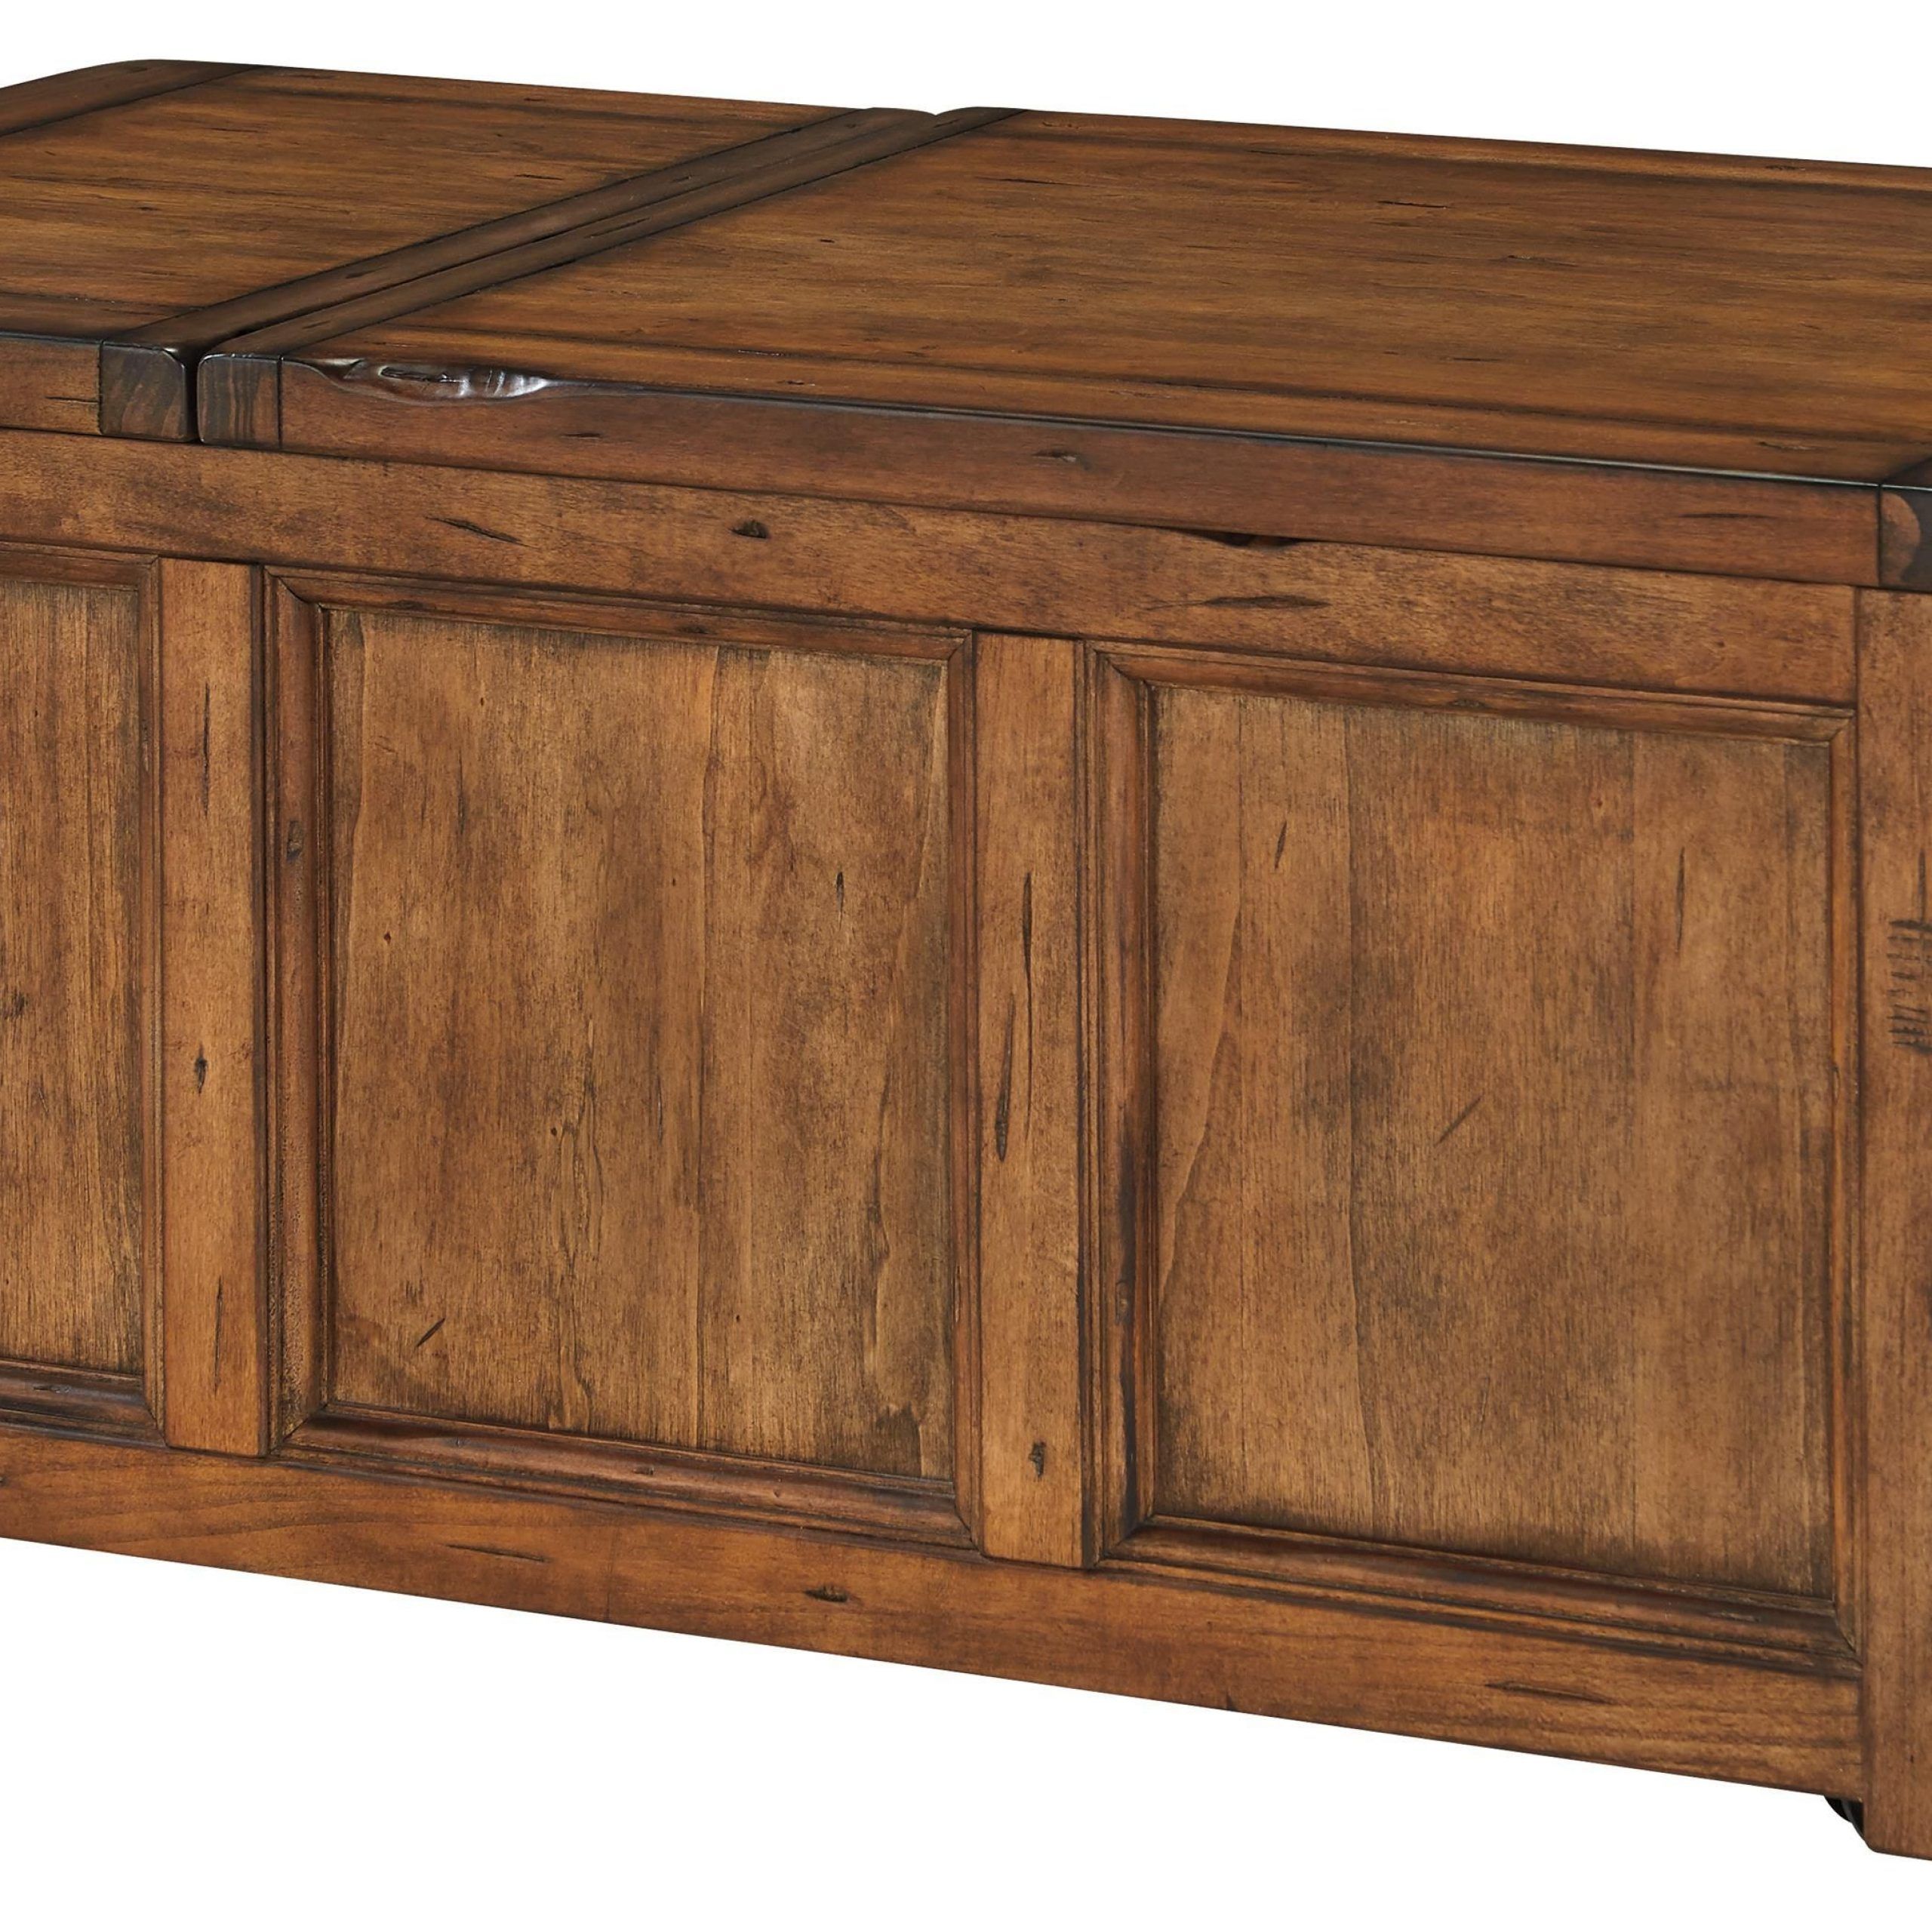 Well Liked Tamonie Rustic Trunk Style Rectangular Lift Top Cocktail Throughout Walnut Wood Storage Trunk Cocktail Tables (View 4 of 20)